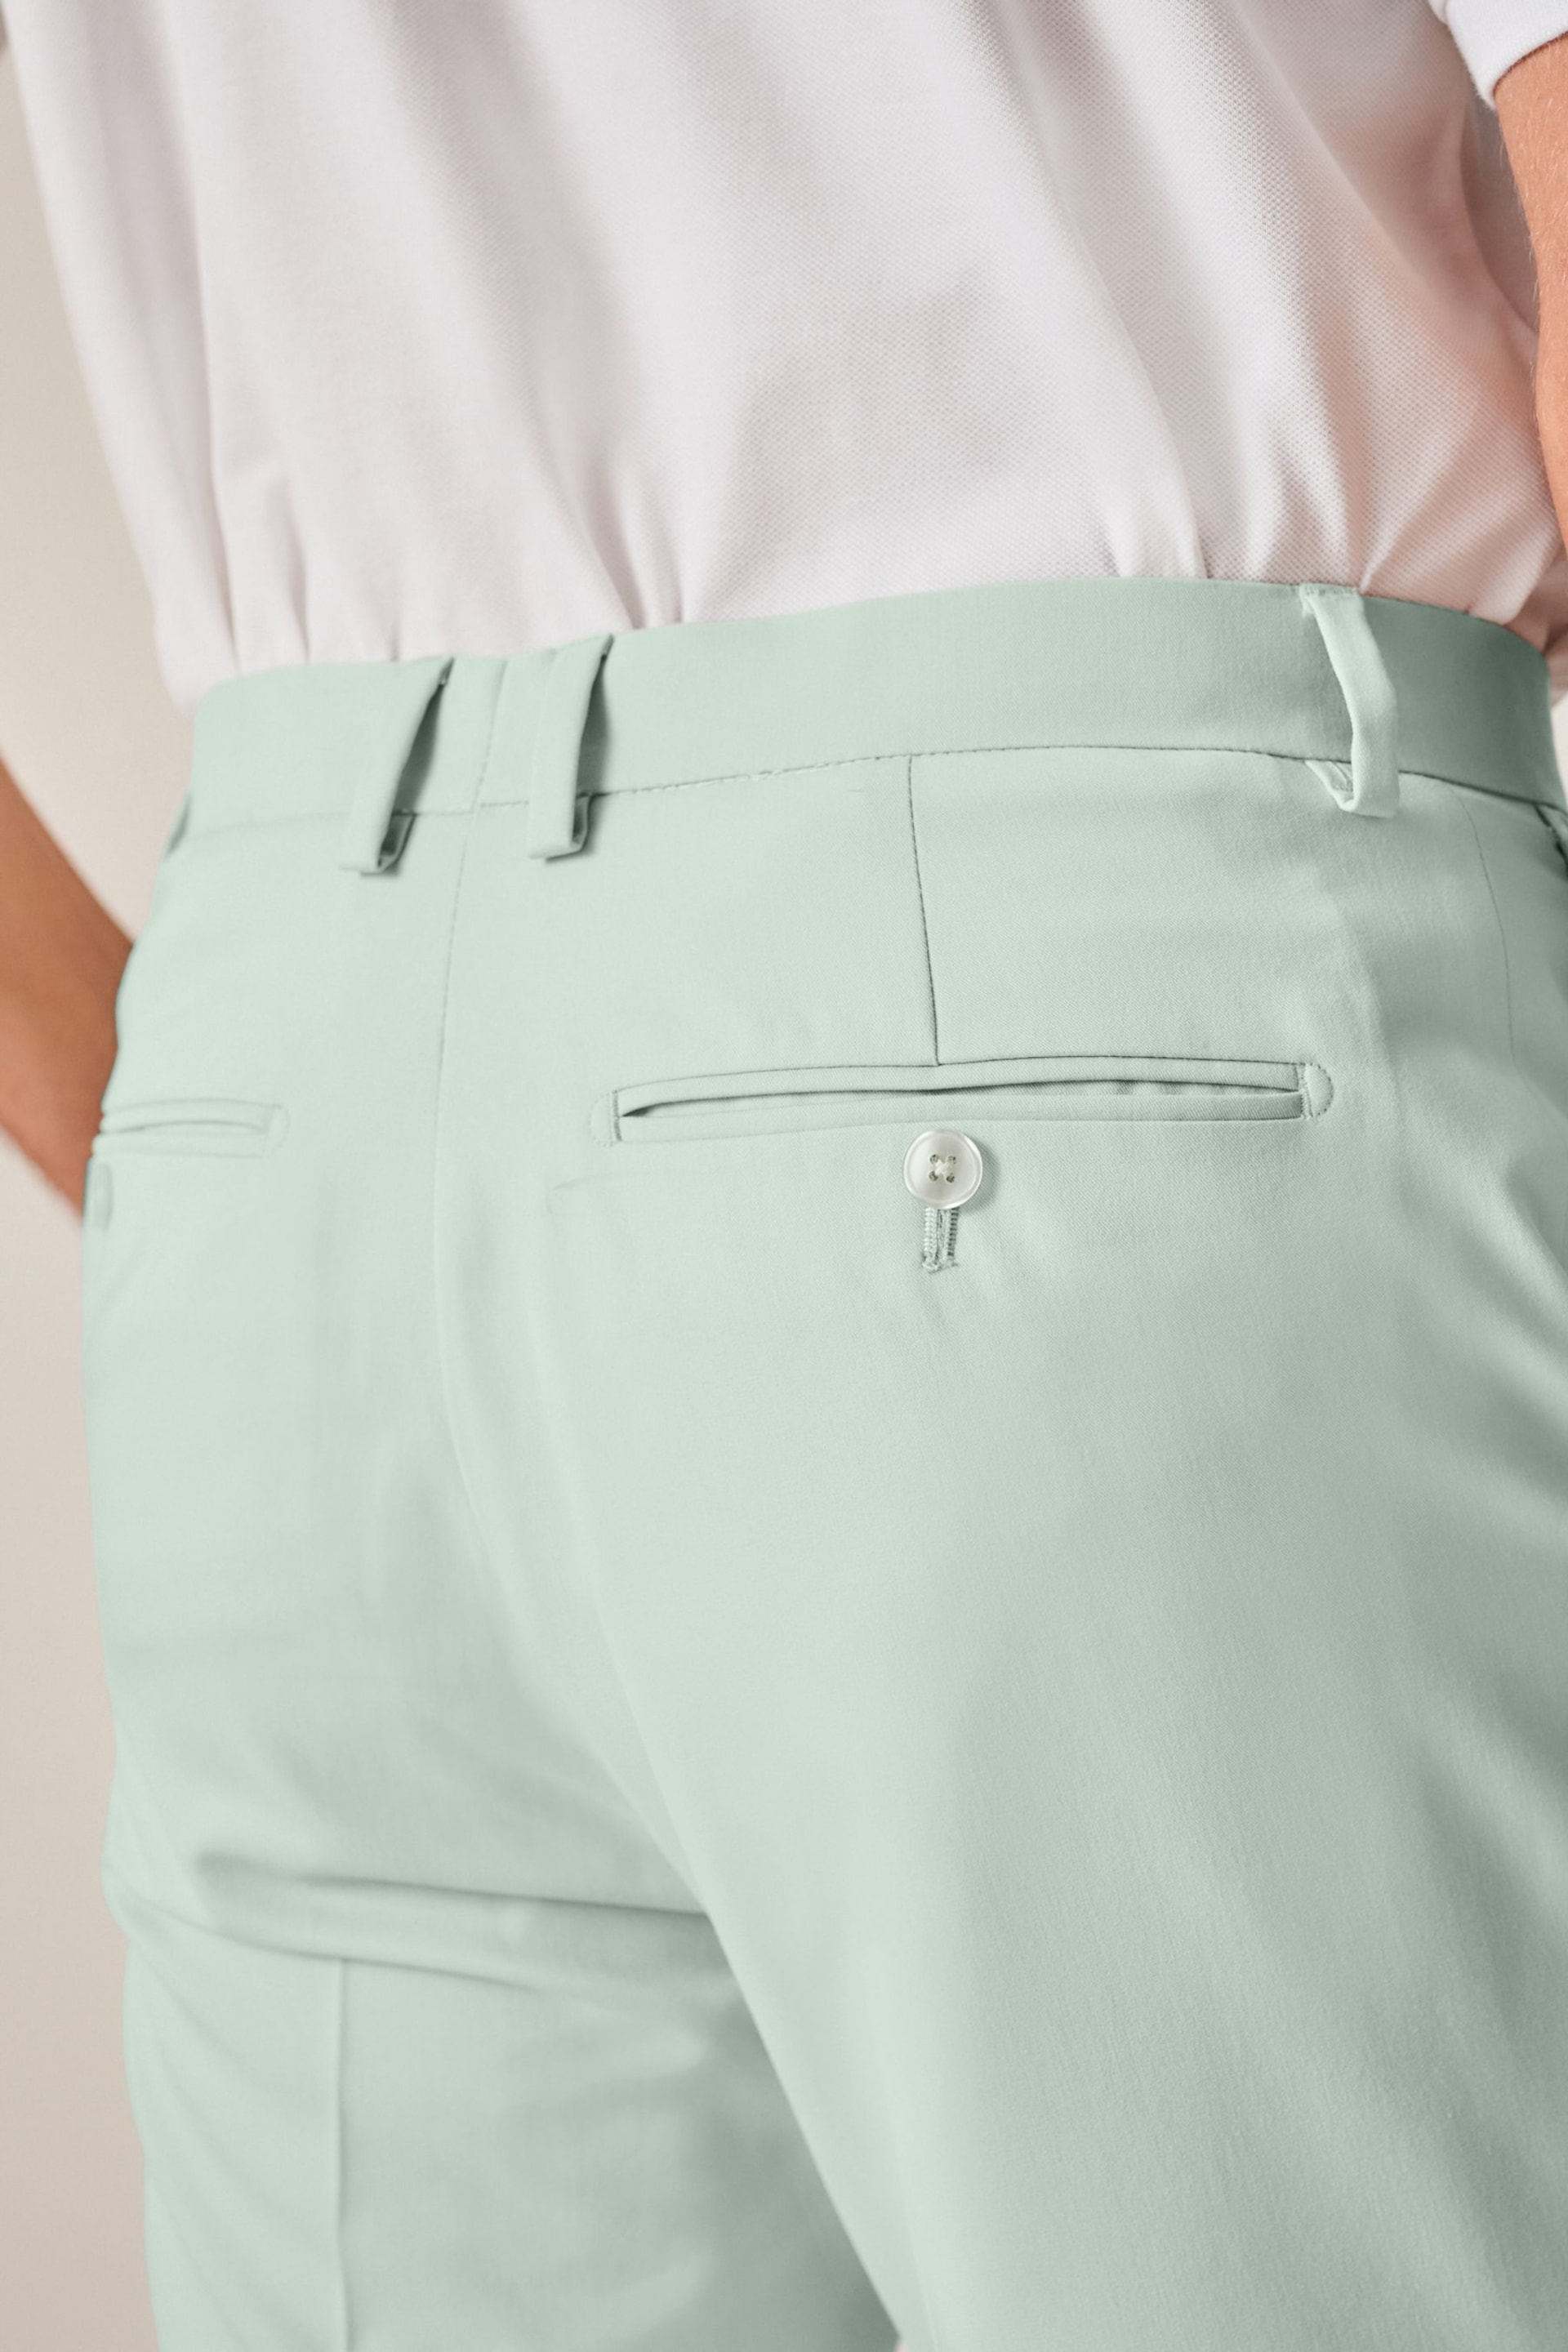 Mint Green Skinny Fit Motionflex Stretch Suit: Trousers - Image 4 of 7